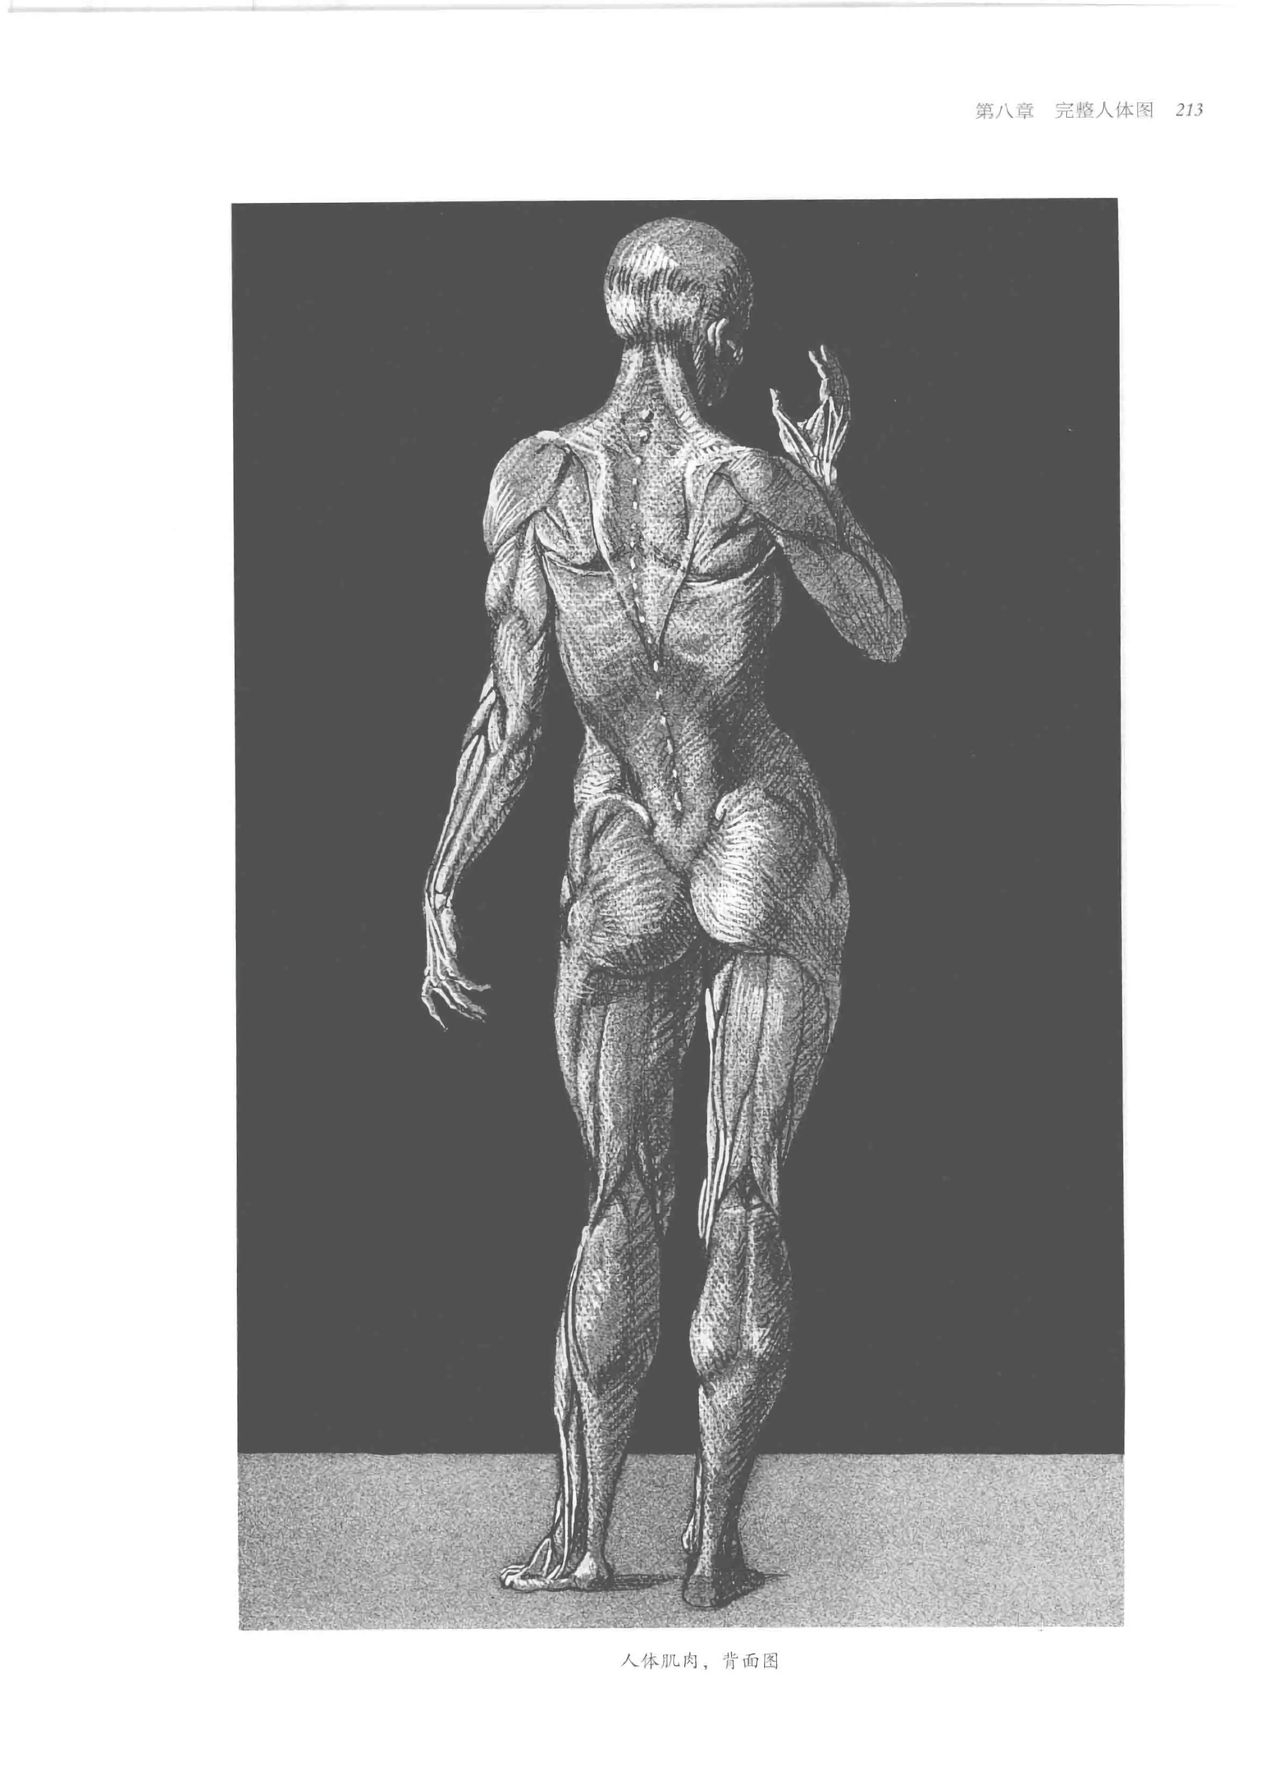 Anatomy-A Complete Guide for Artists - Joseph Sheppard [Chinese] 213